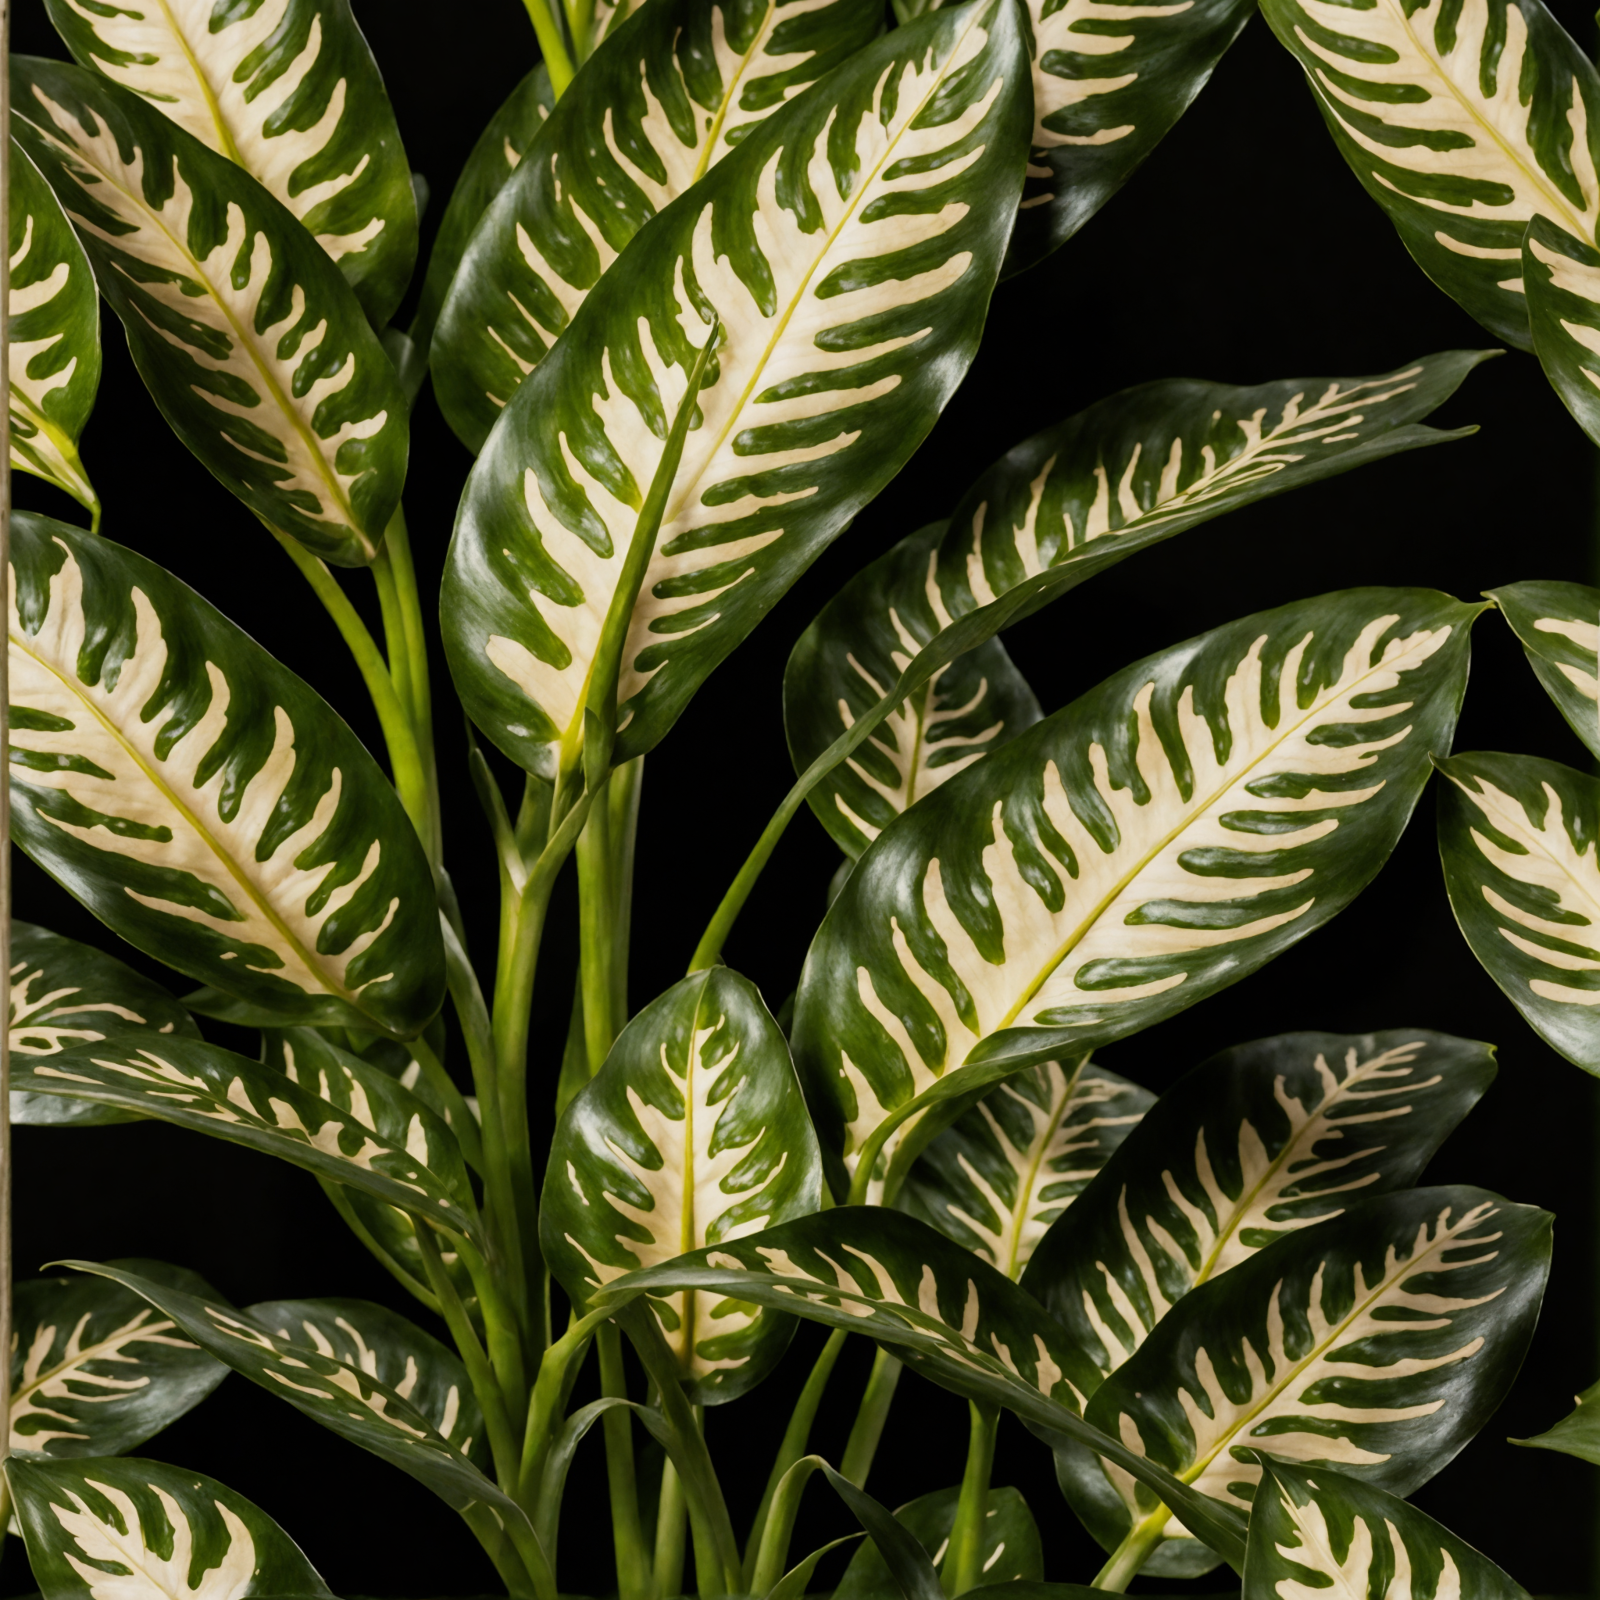 Dieffenbachia seguine in a planter, with detailed leaves, against a dark background, in clear indoor lighting.